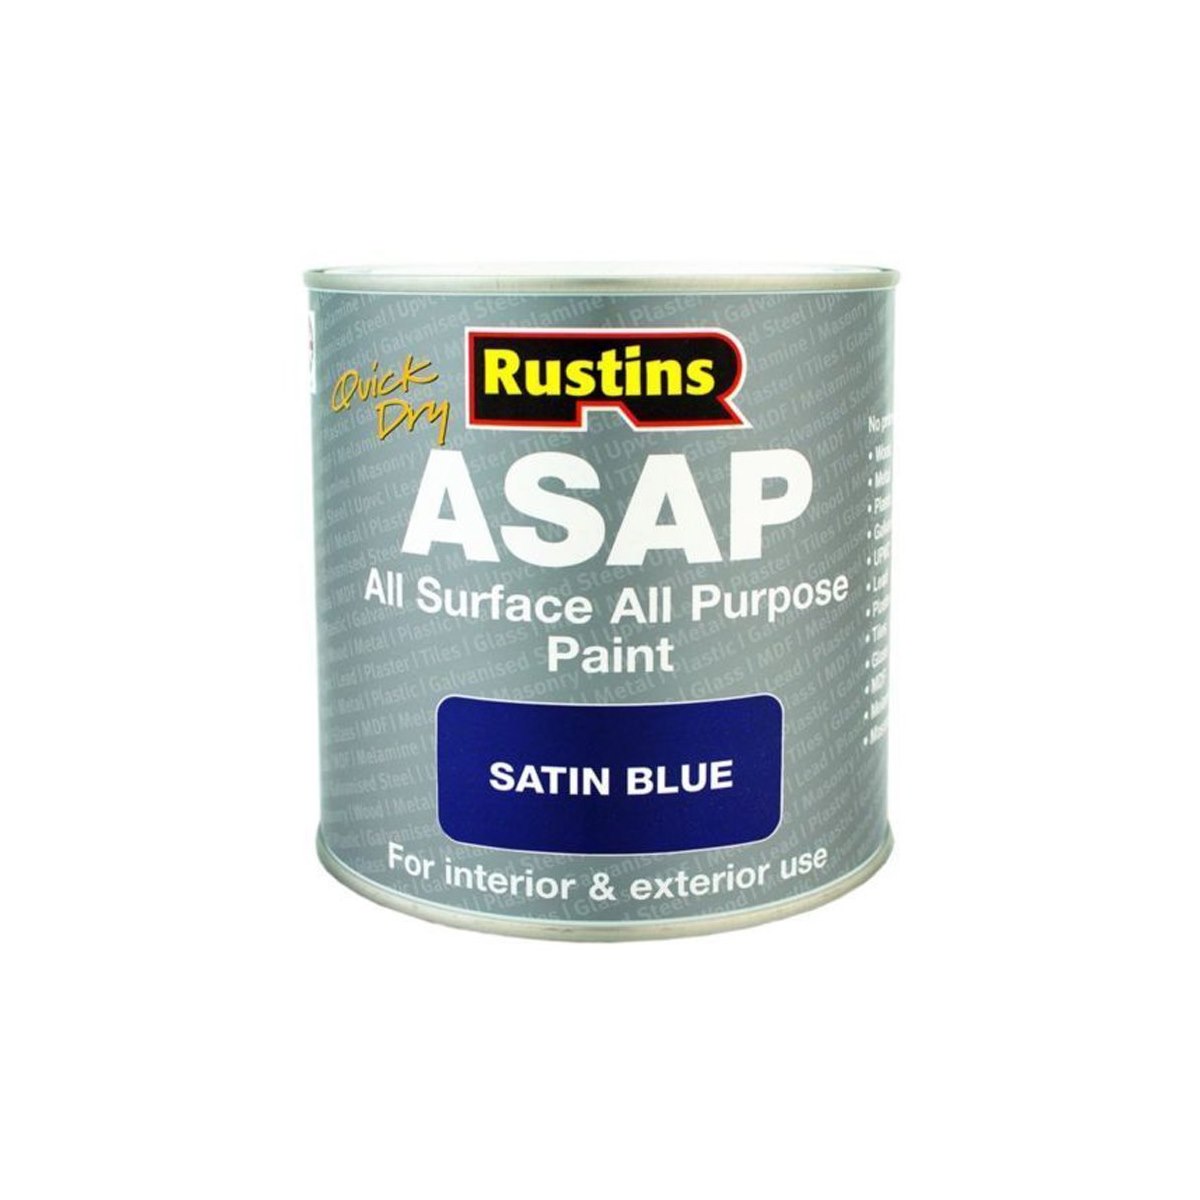 Rustins Quick Dry All Surface All Purpose Paint (ASAP) Blue 500ml